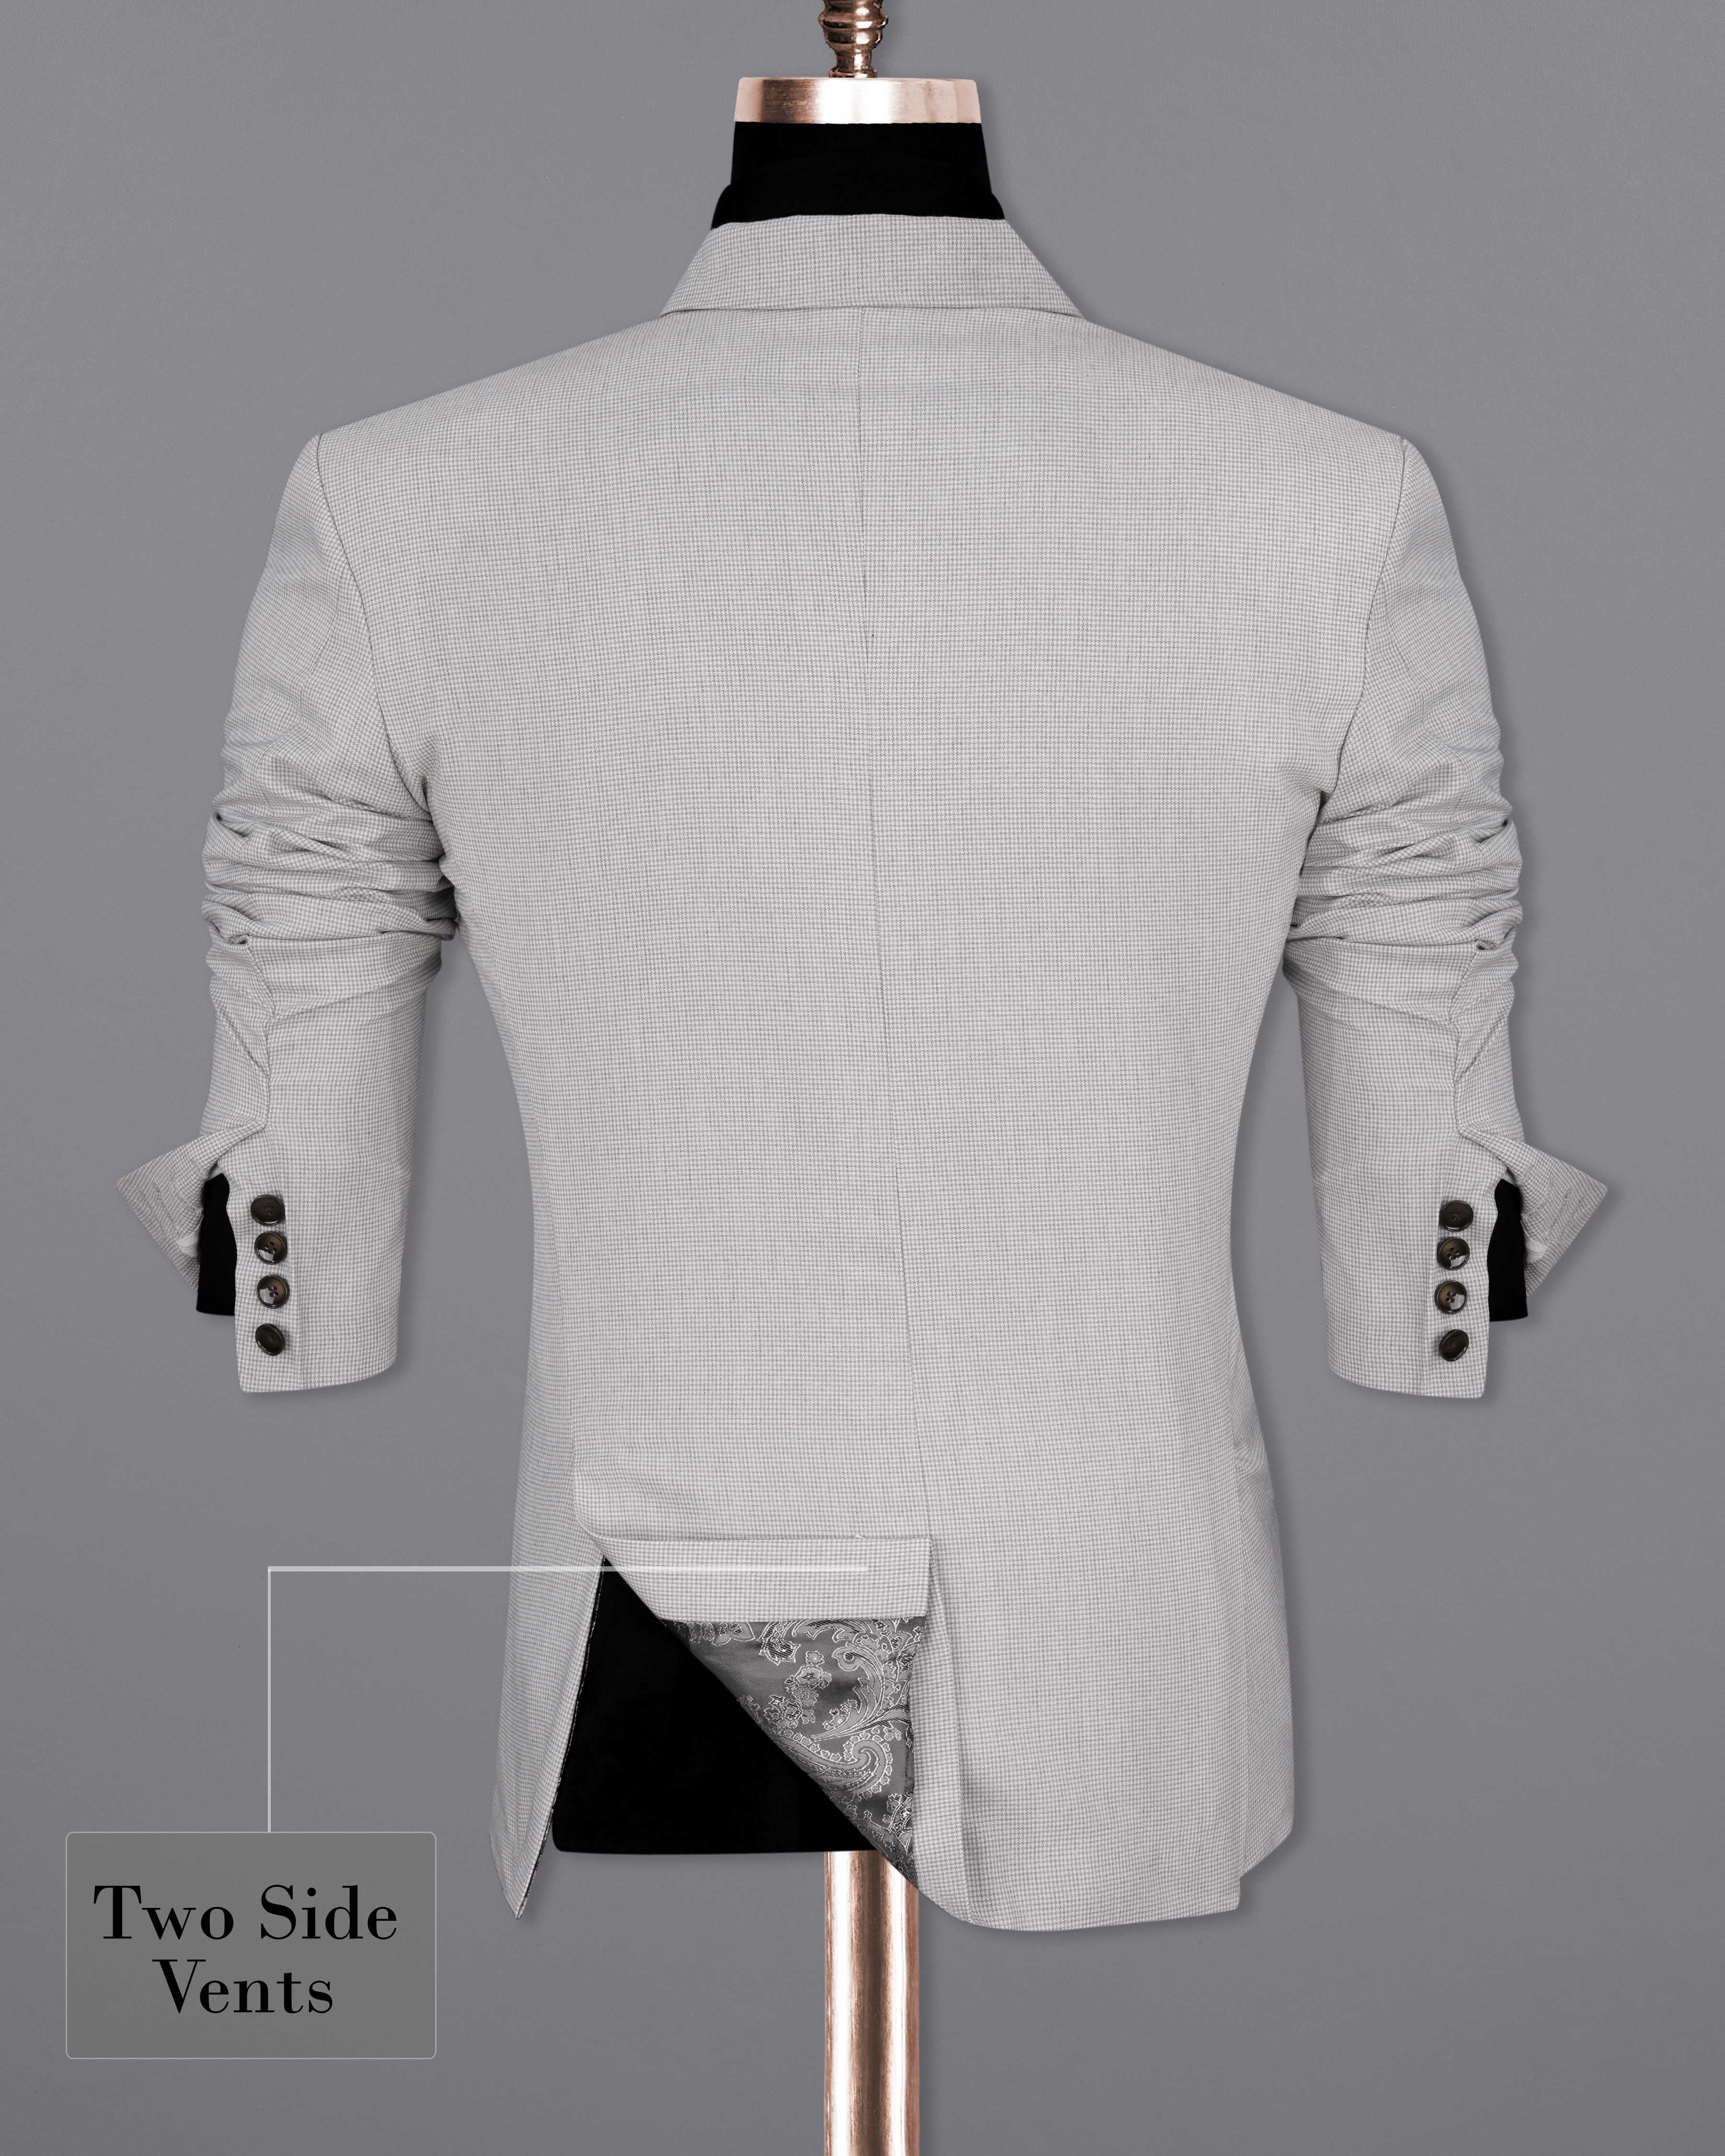 Pale Slate Gray Double Breasted Blazer BL2055-DB-36, BL2055-DB-38, BL2055-DB-40, BL2055-DB-42, BL2055-DB-44, BL2055-DB-46, BL2055-DB-48, BL2055-DB-50, BL2055-DB-52, BL2055-DB-54, BL2055-DB-56, BL2055-DB-58, BL2055-DB-60